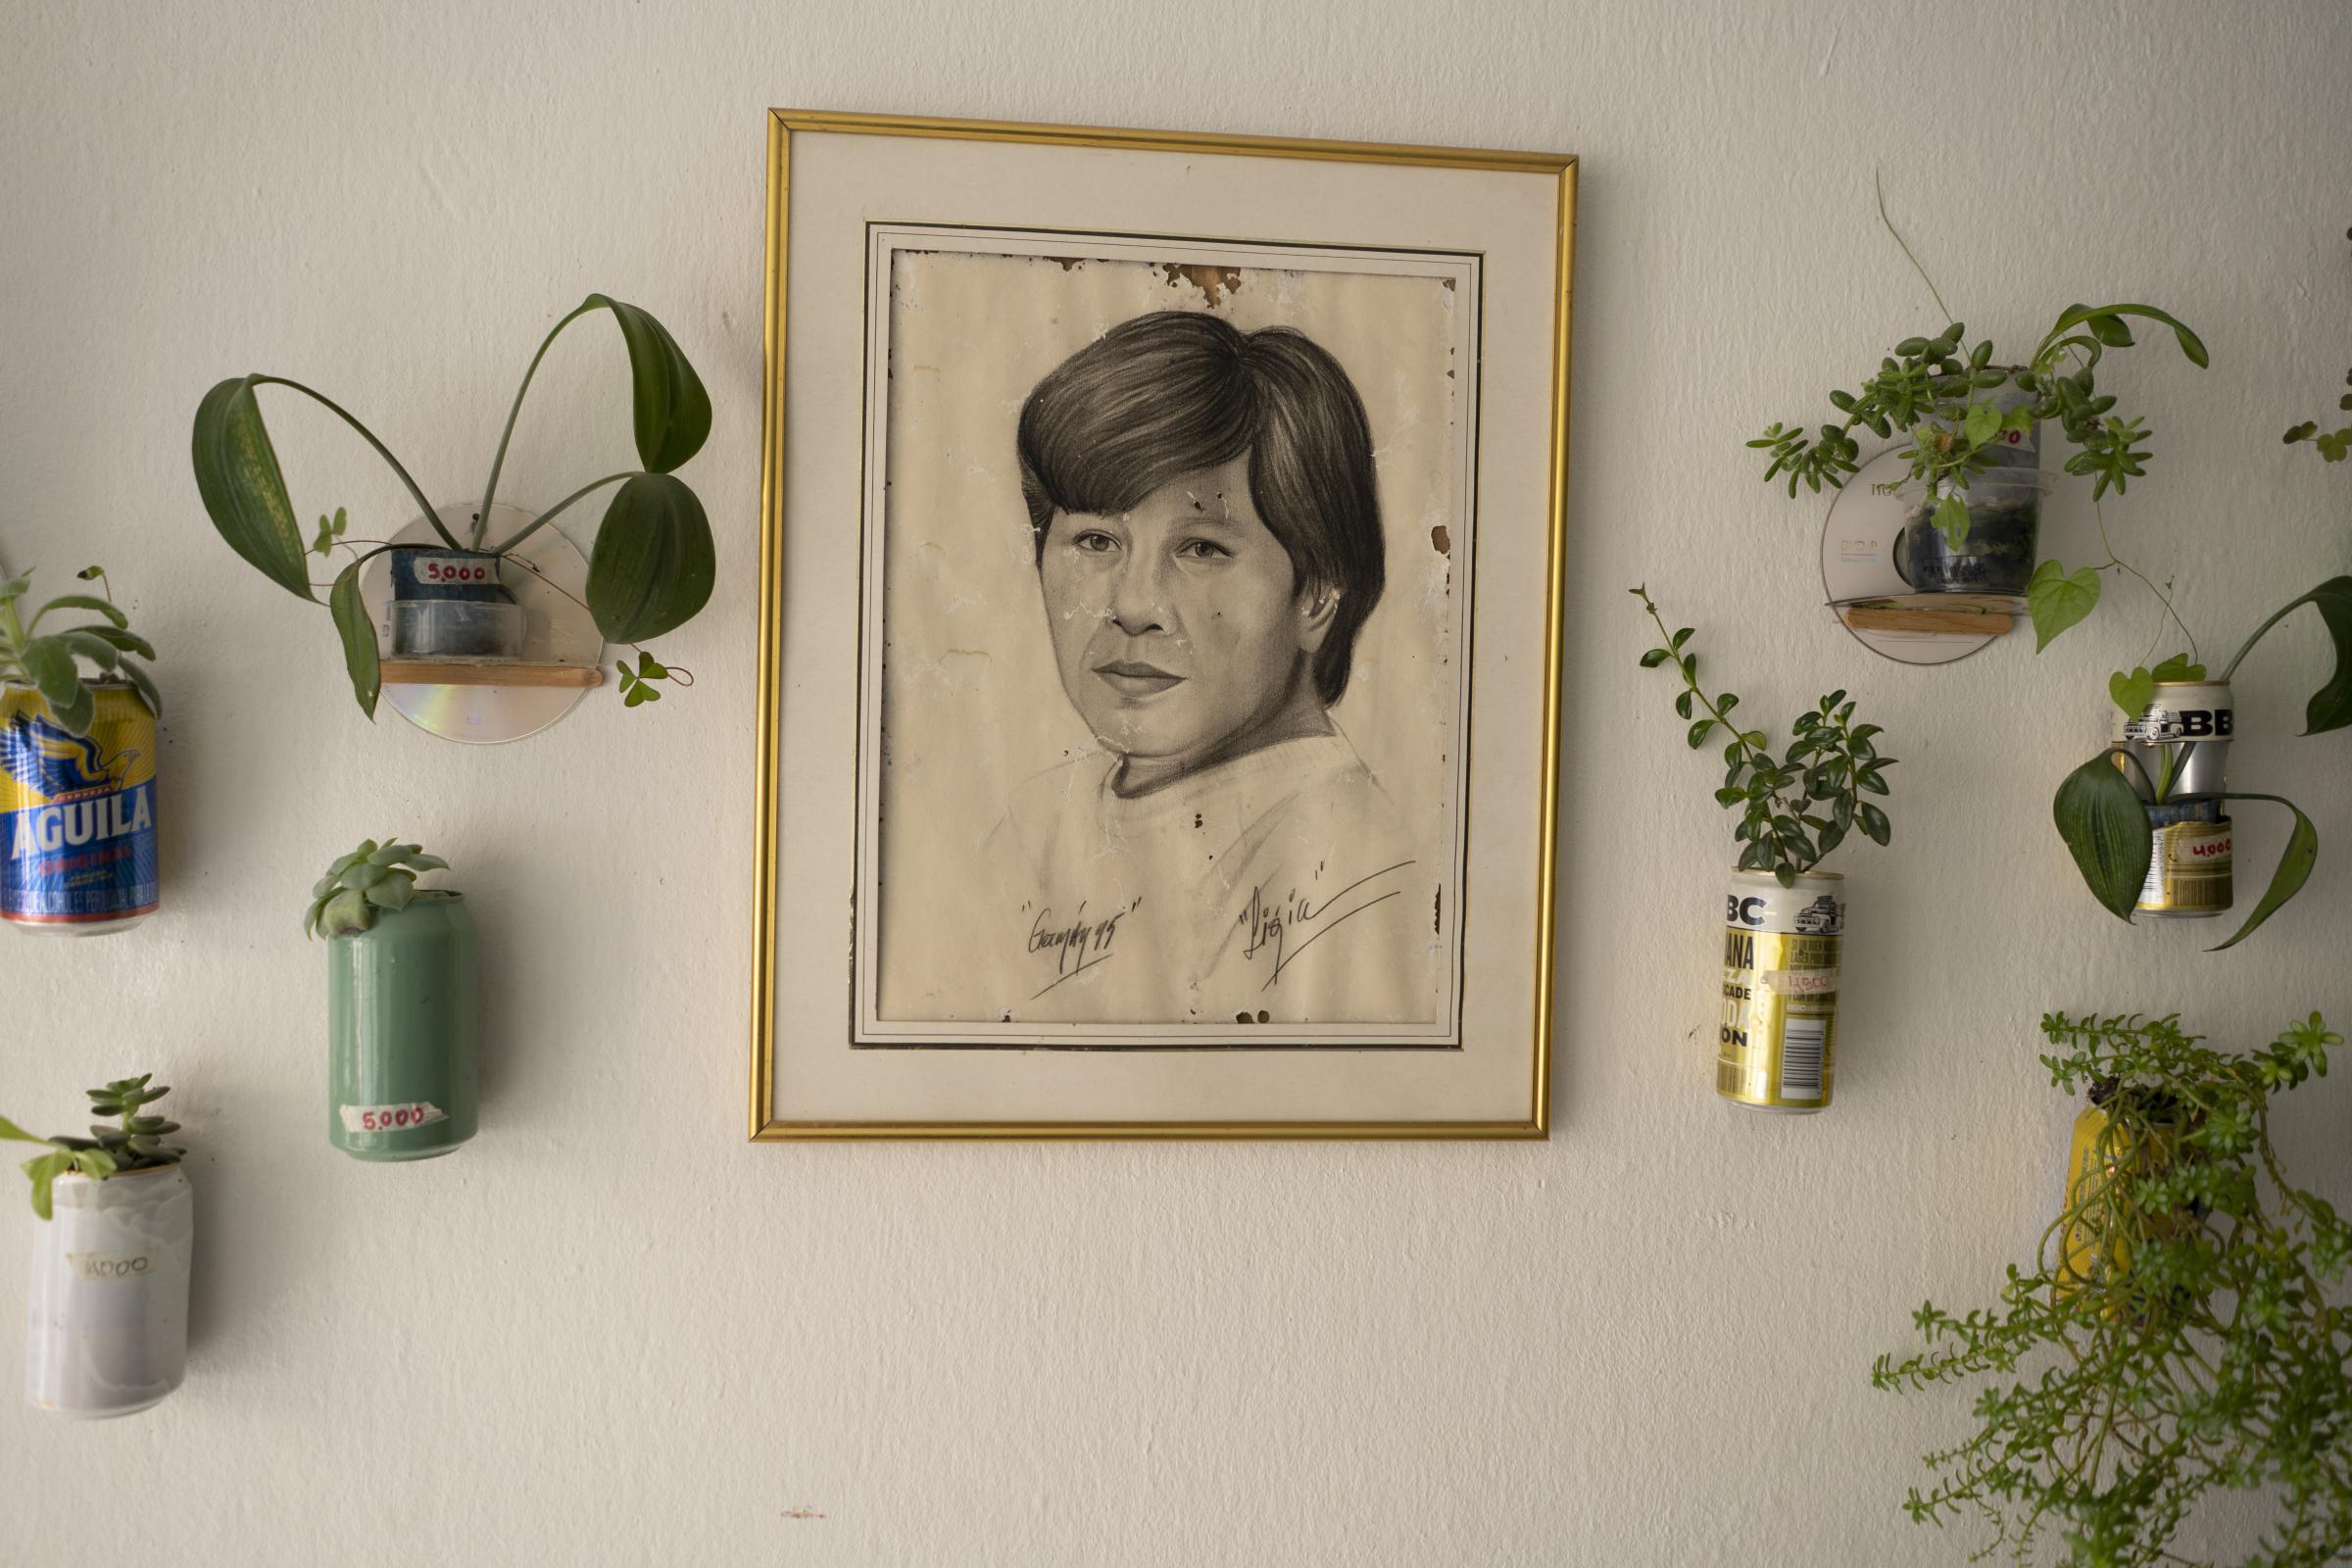 Cleanest neighborhood - 07/03/22. Portrait of Ligia Sanabria next to ornamental plants planted in beer cans in her house....